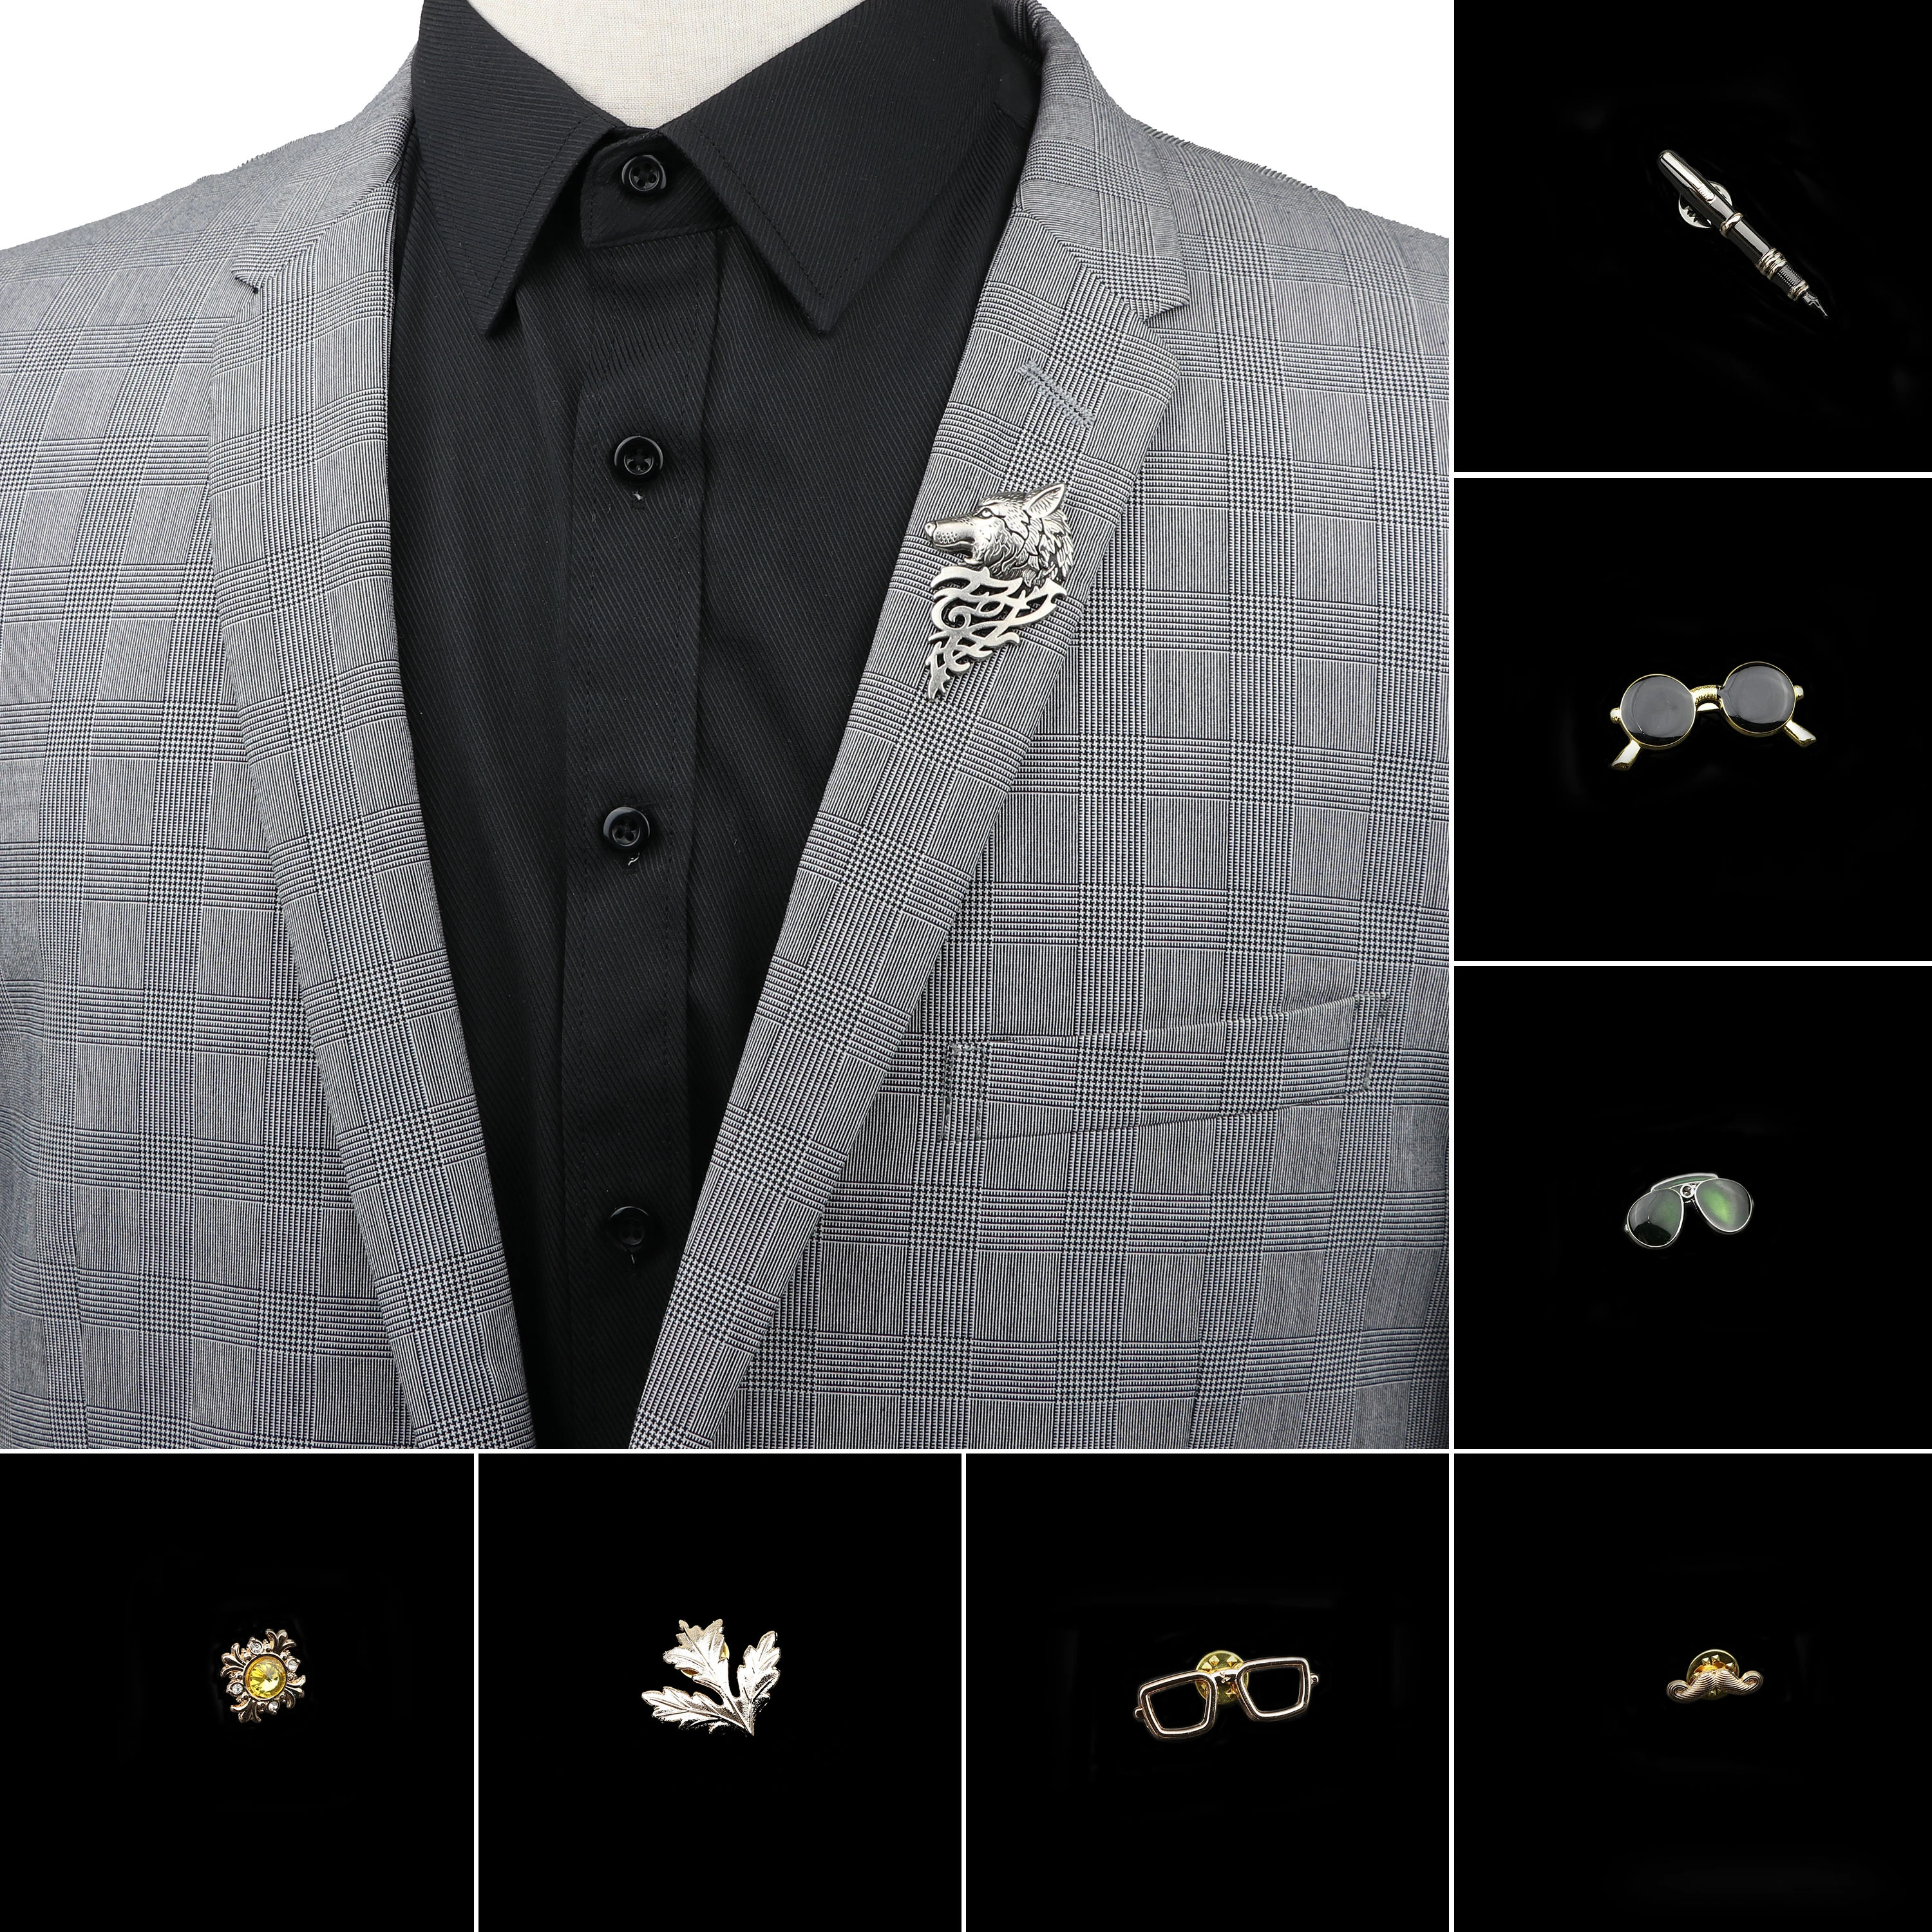 Men's Advanced Chic Brooches Wolf Sunglasses Pin Suit Shawl Lapel Pins Uxedo Corsage Hat Shirt Collar Pin Party Daily Accessory